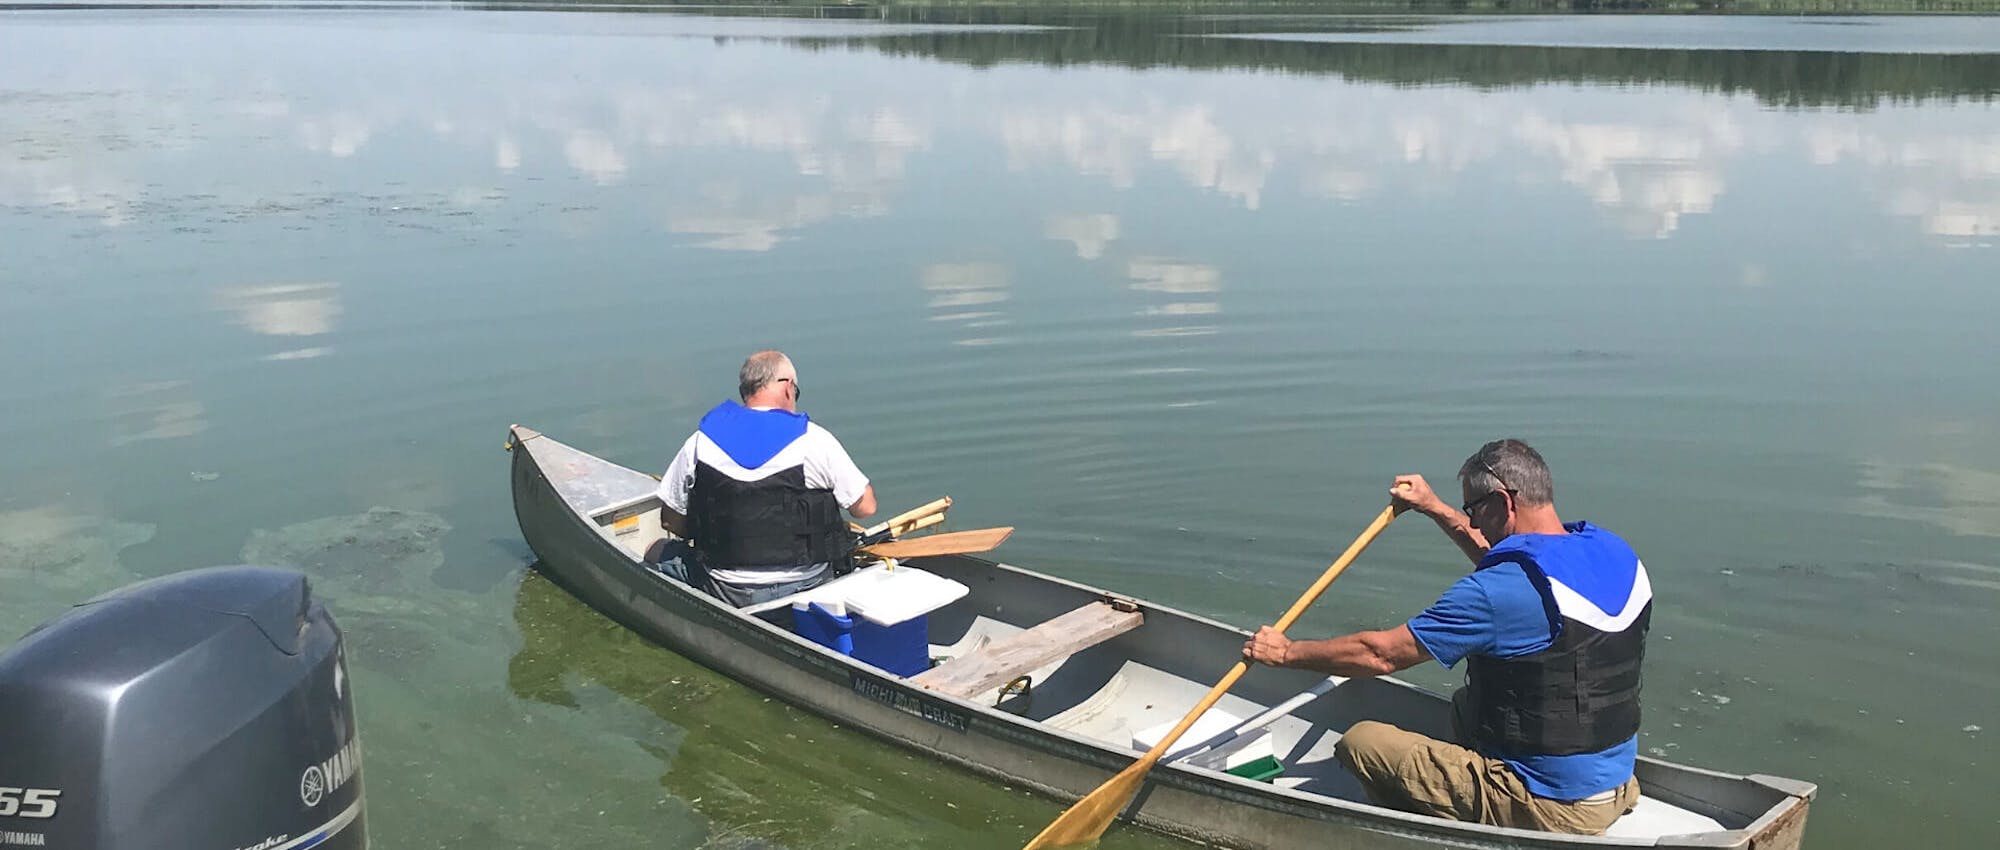 Two men in blue outfits sit in a canoe in a lake.